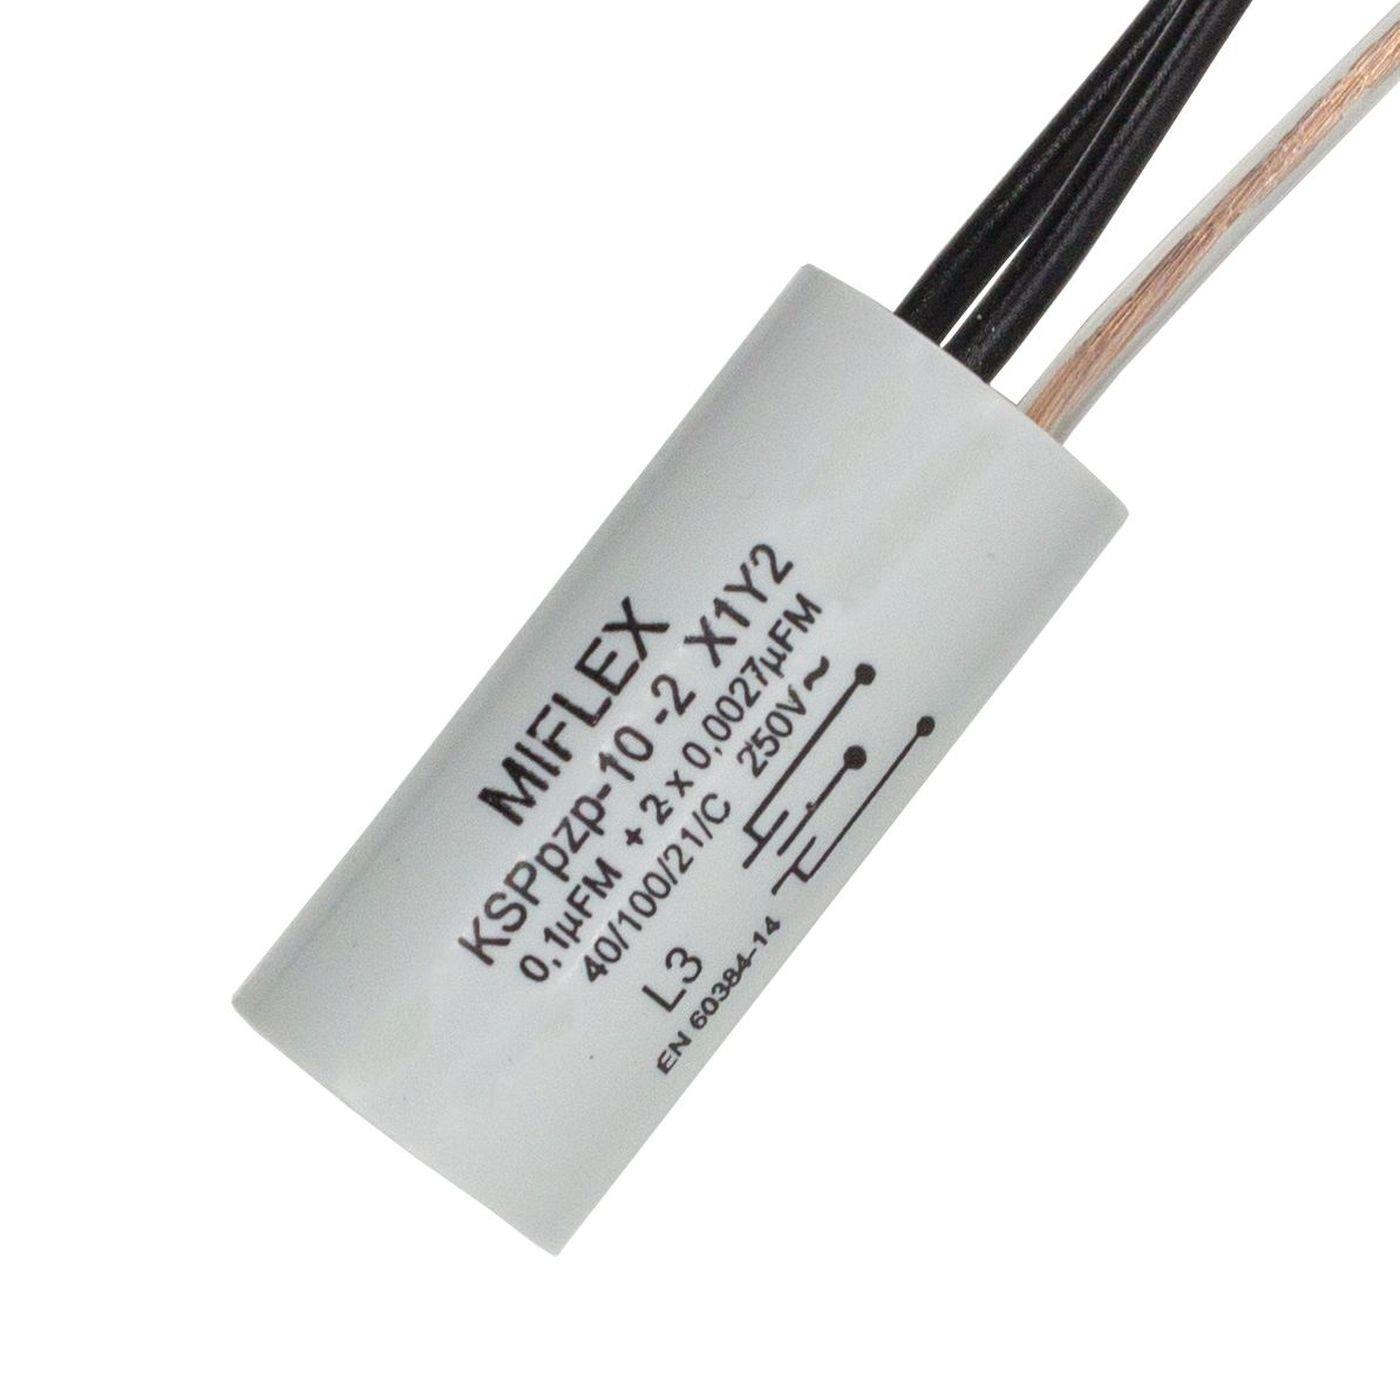 Interference suppression Capacitor Radial 1x 0,1µF + 2x 0,0027µF (2,7nF) 250V 15x35mm